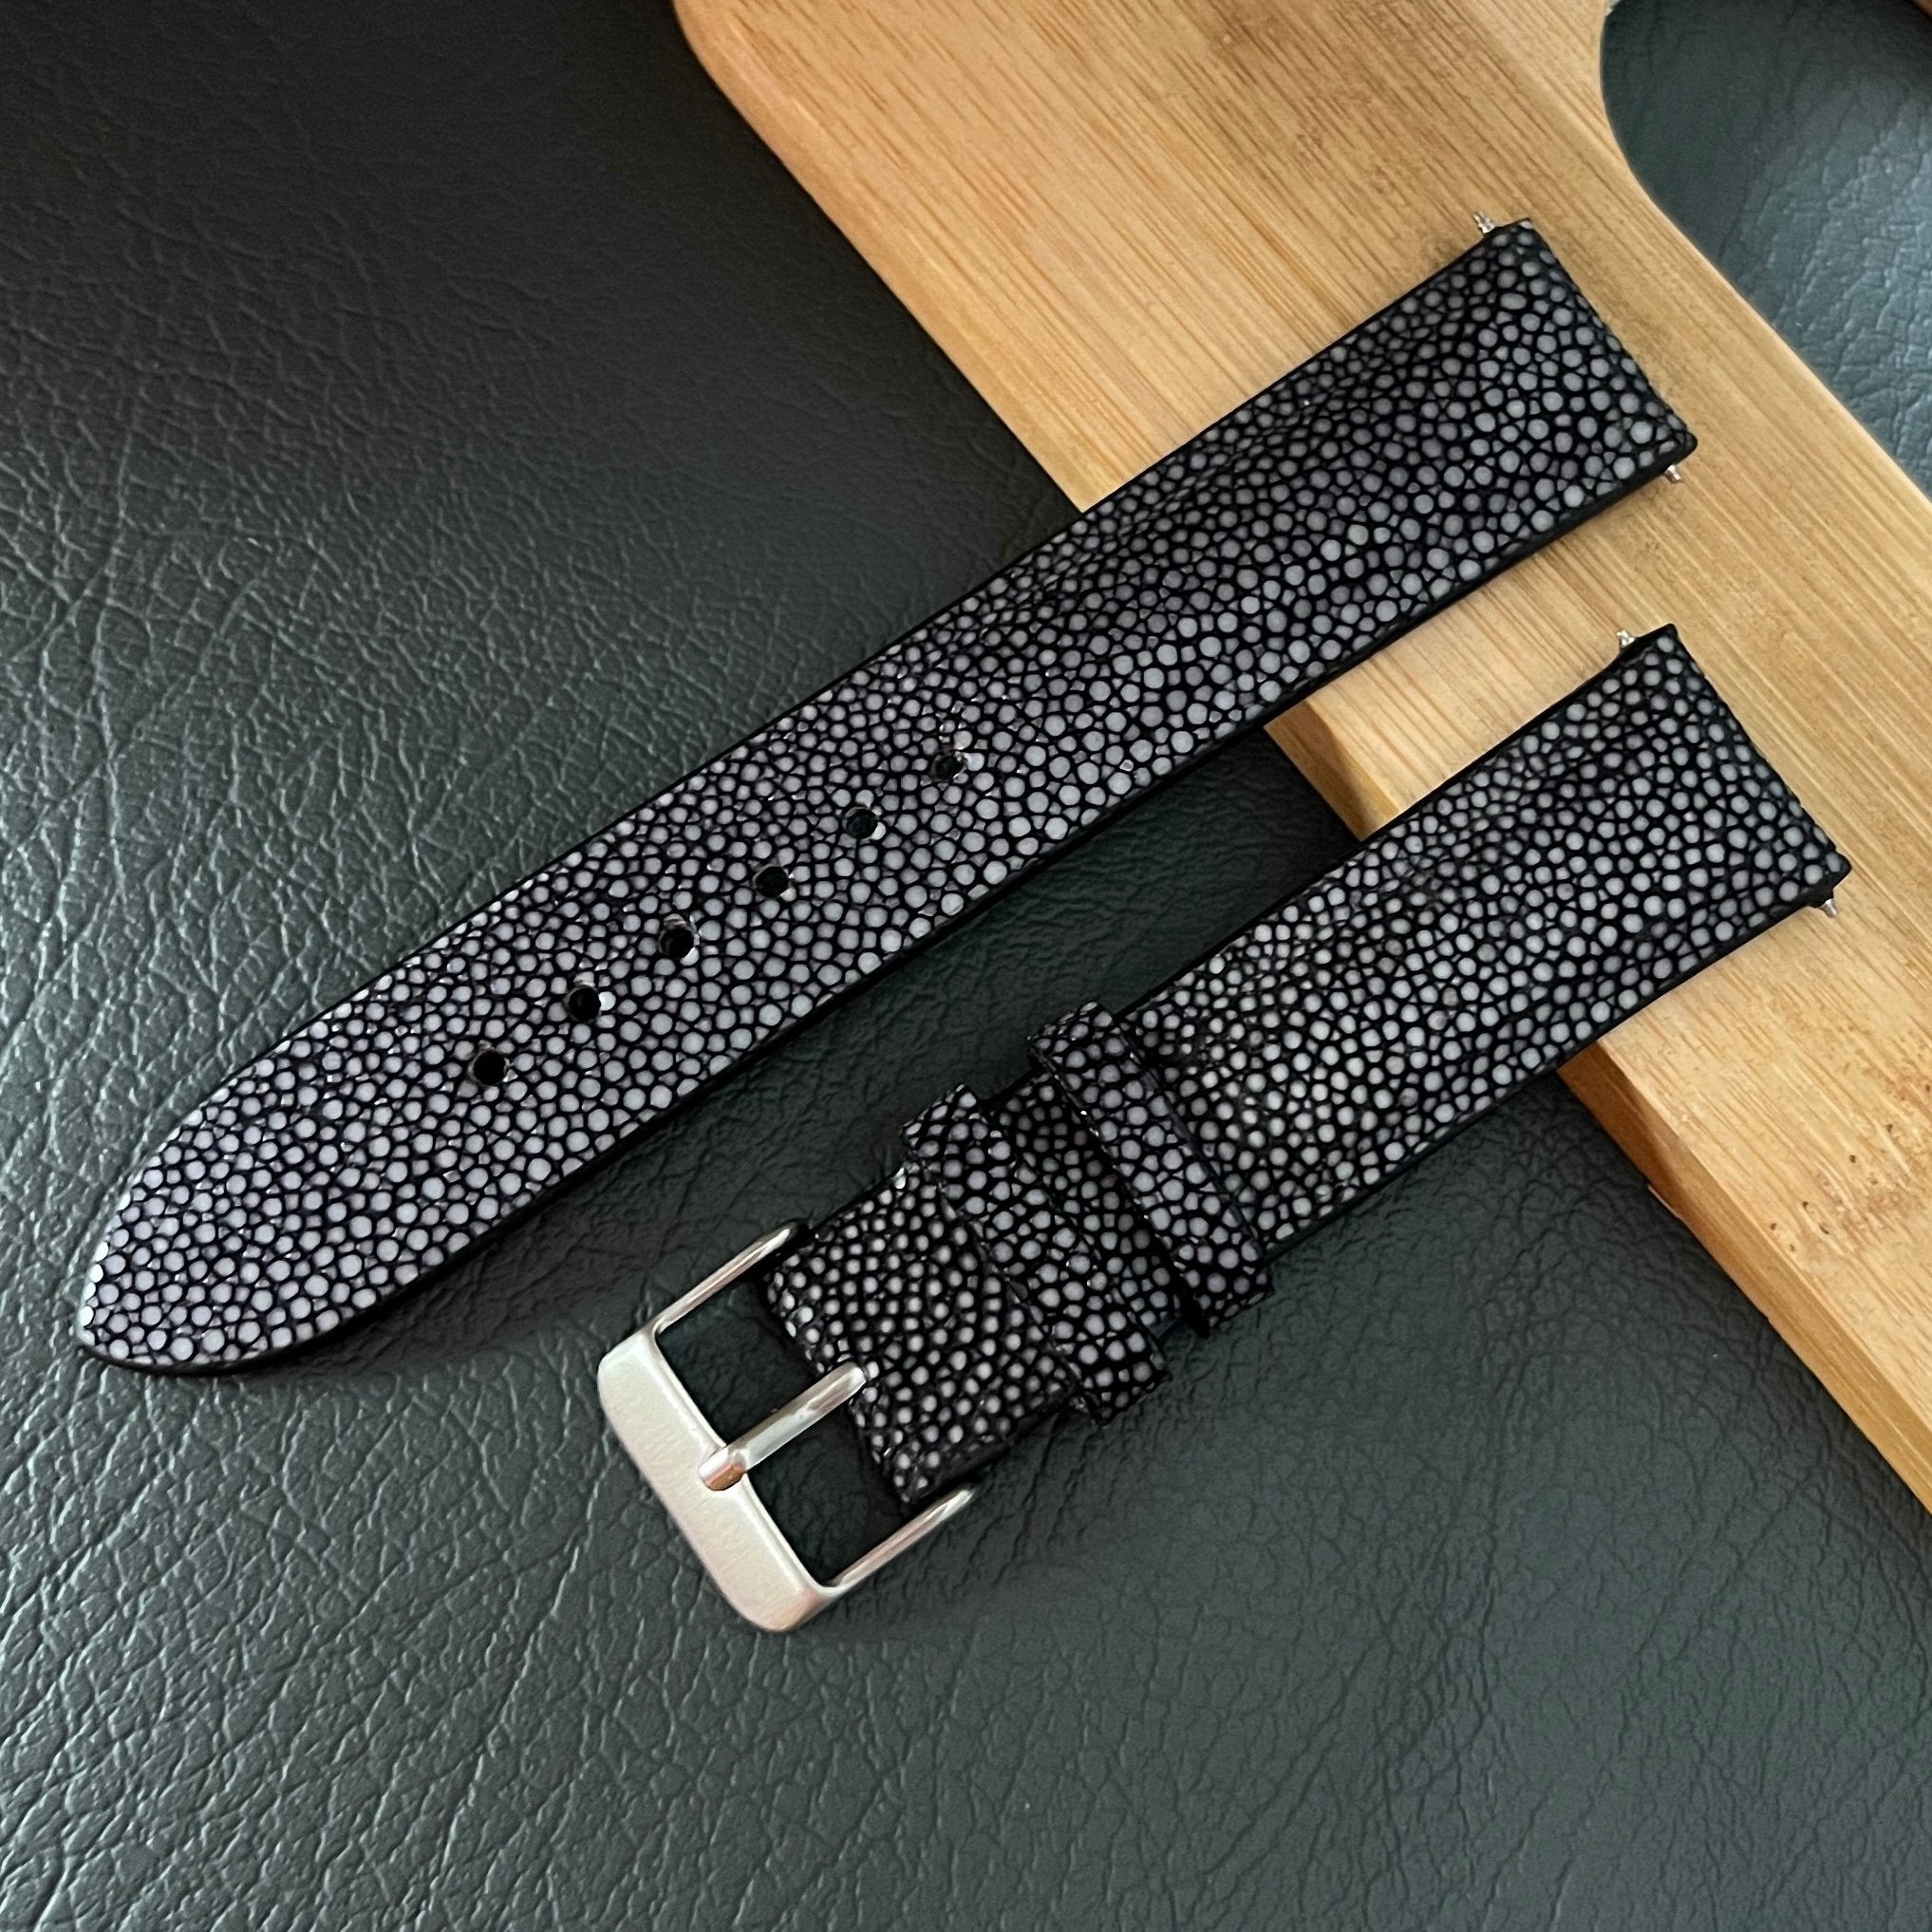 Black Stingray Leather Watch Band Replacement Wristwatch Strap | DH-60 - Vinacreations